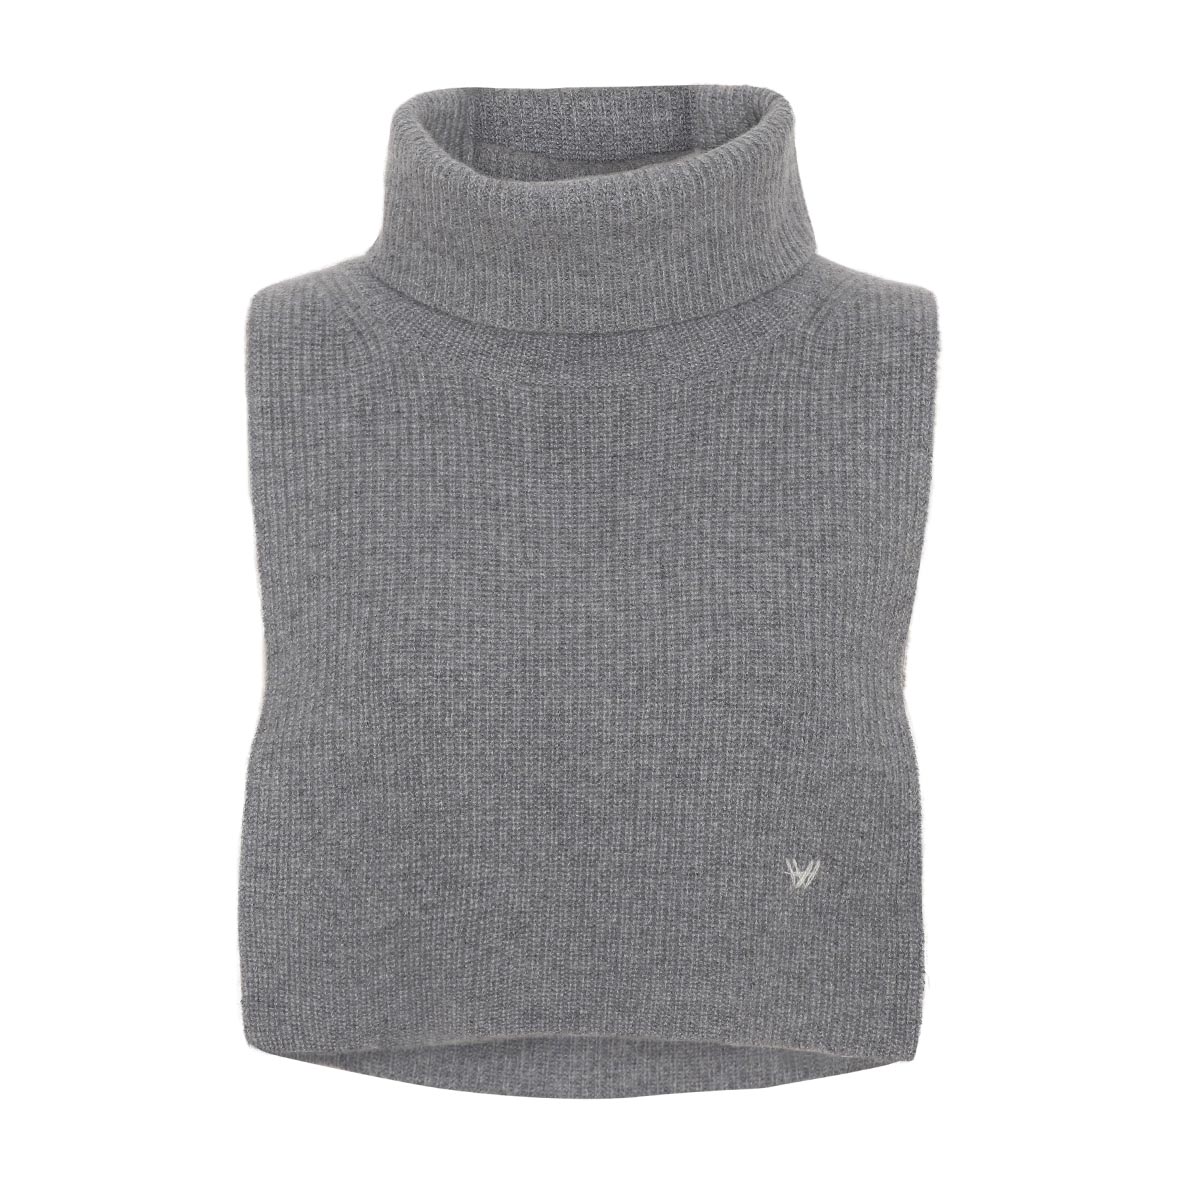 Classic, ribbed neck warmer in 100% premium heavy cashmere knit from Inner Mongolia with folded neckline, and free-falling front.